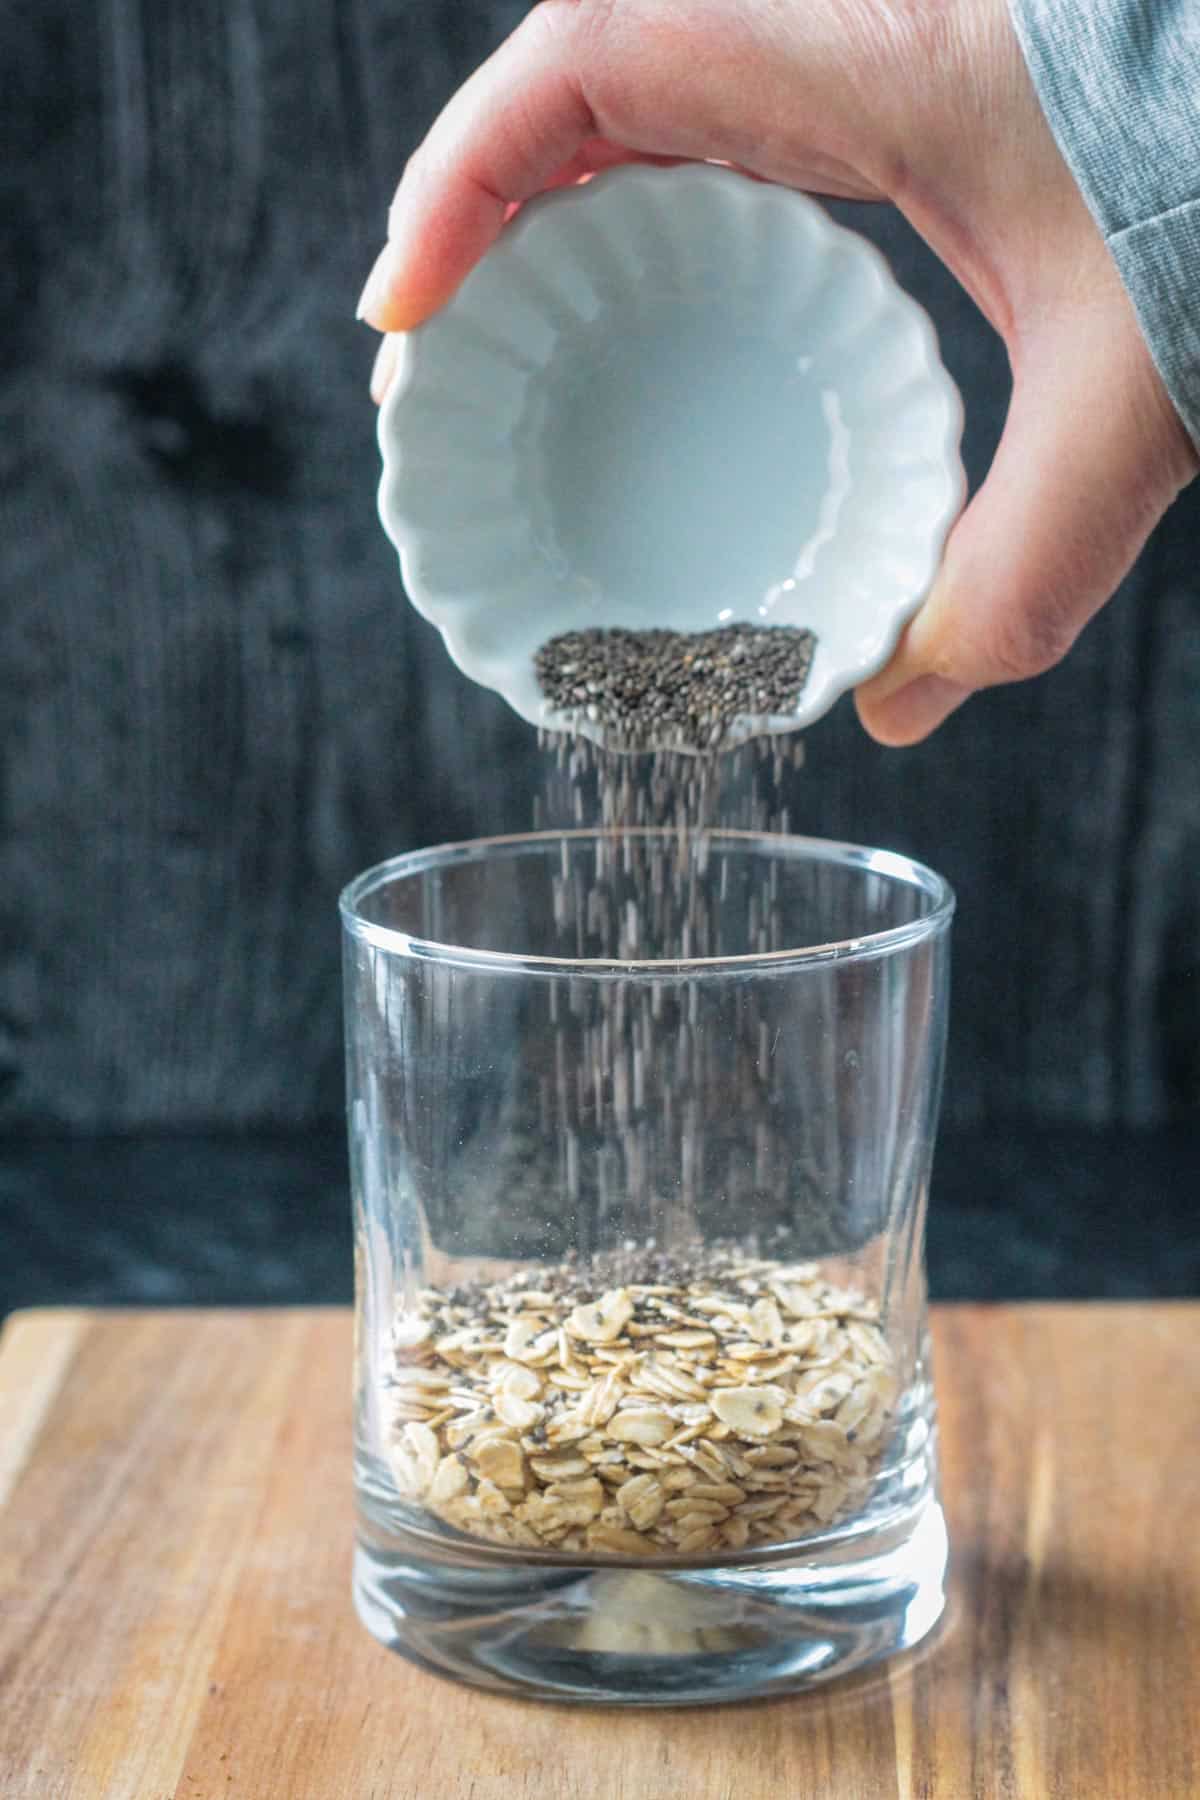 Pouring chia seeds into the glass on top of oats.